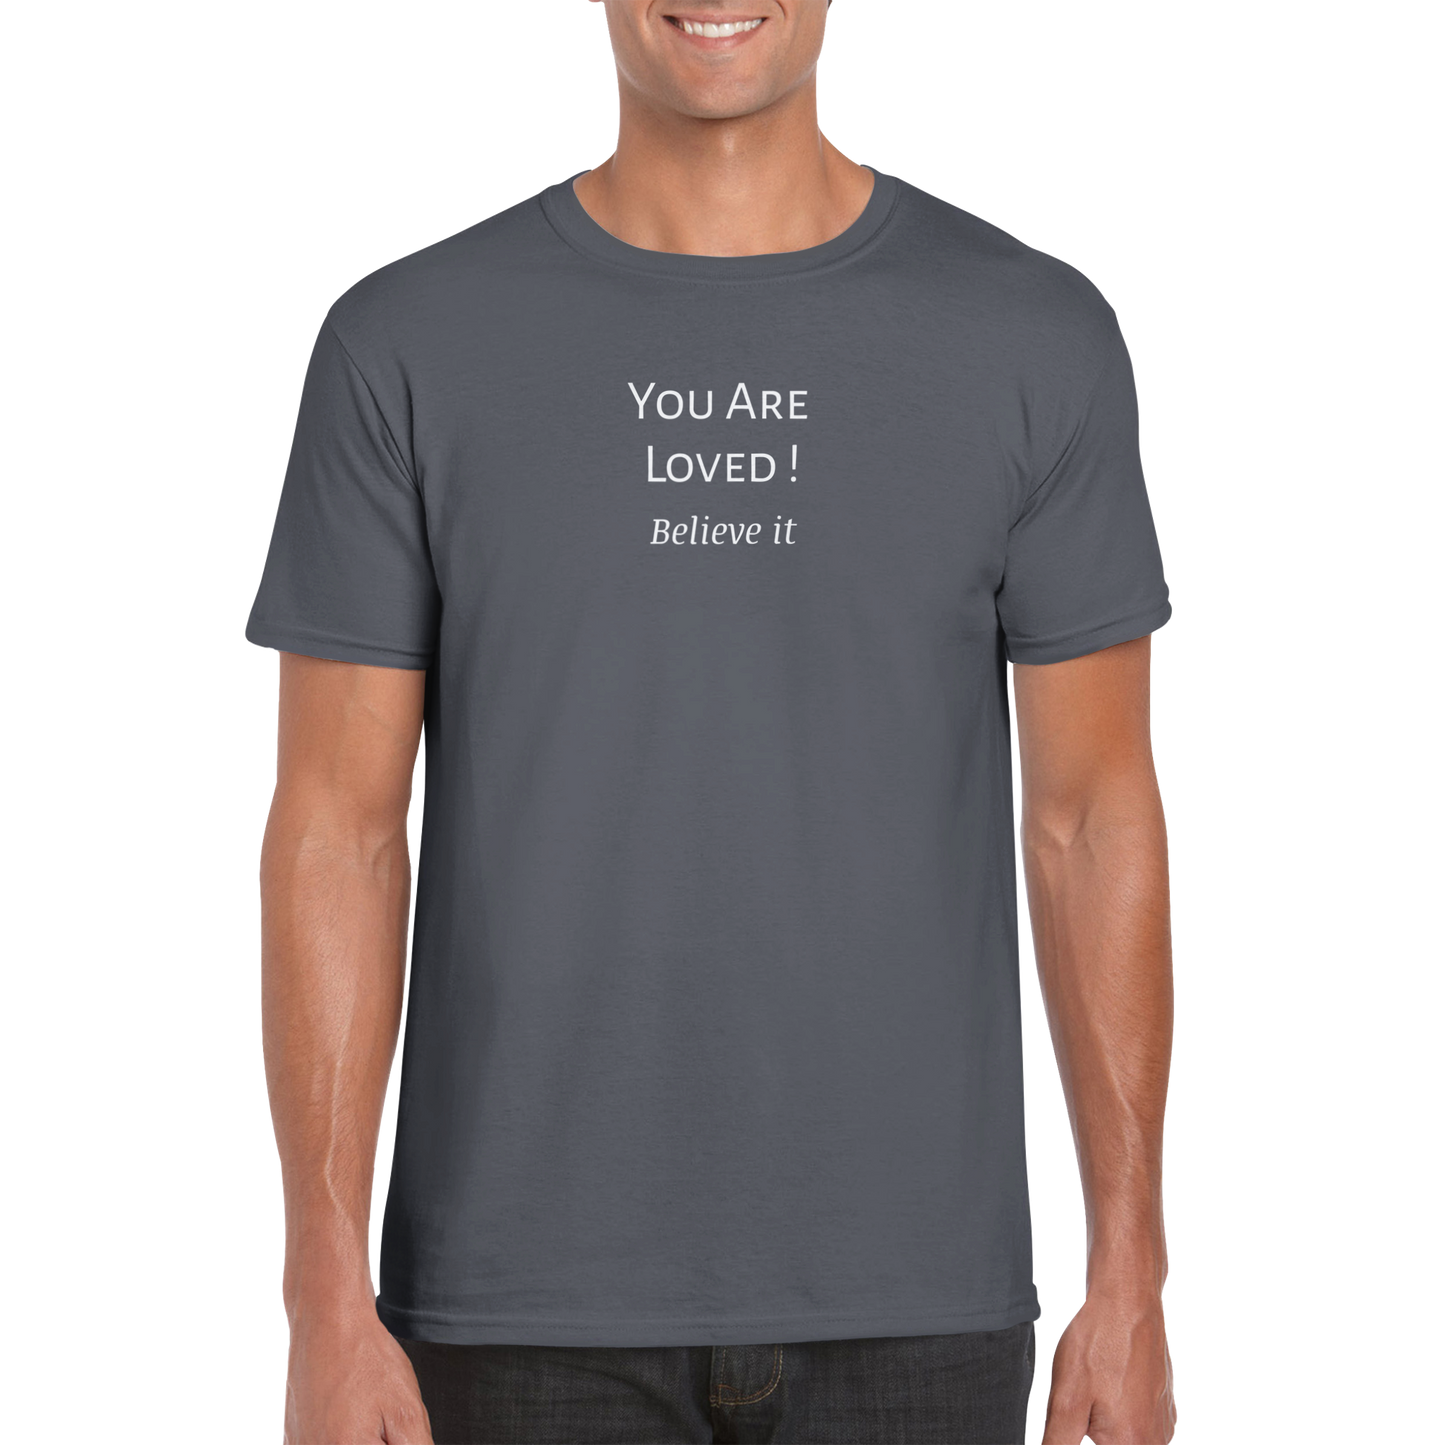 You Are Loved ! T-shirt. Wear it and share it forward.